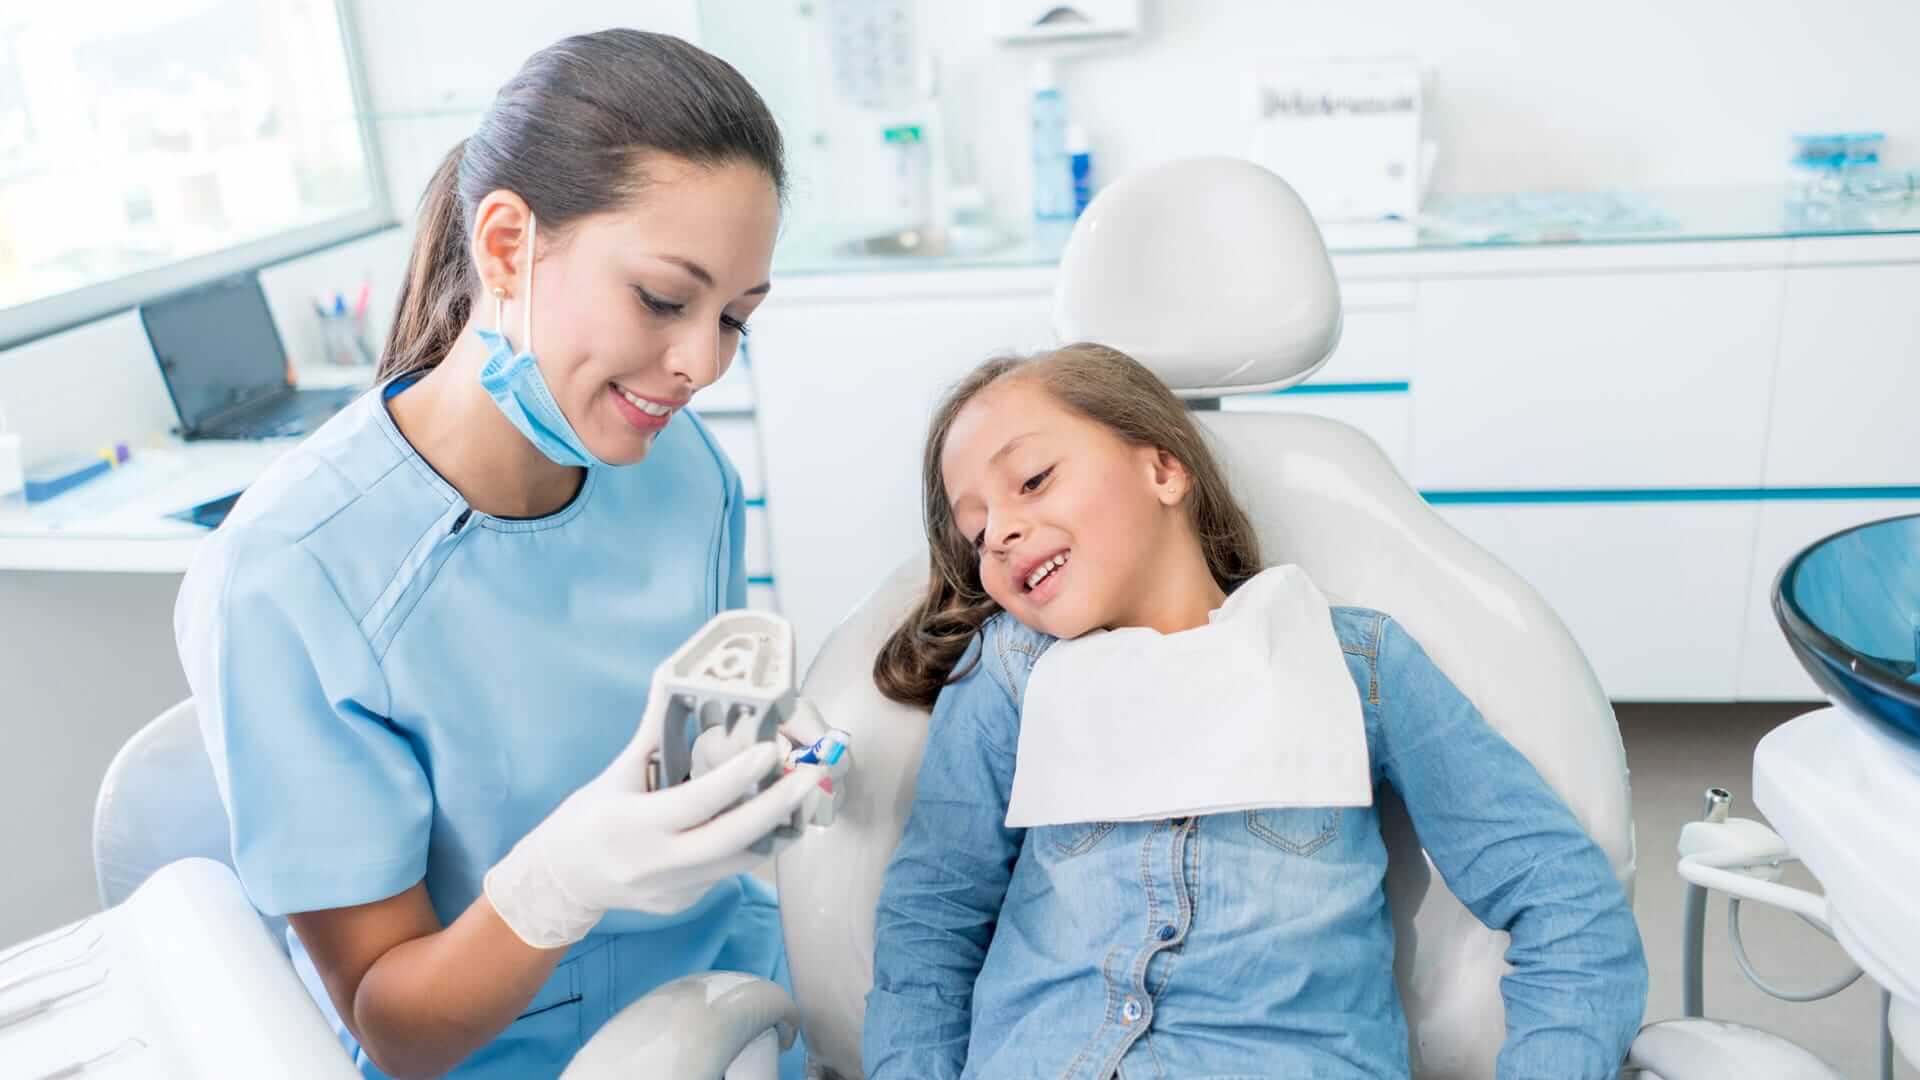 Children’s dental health: The role of a general dentist